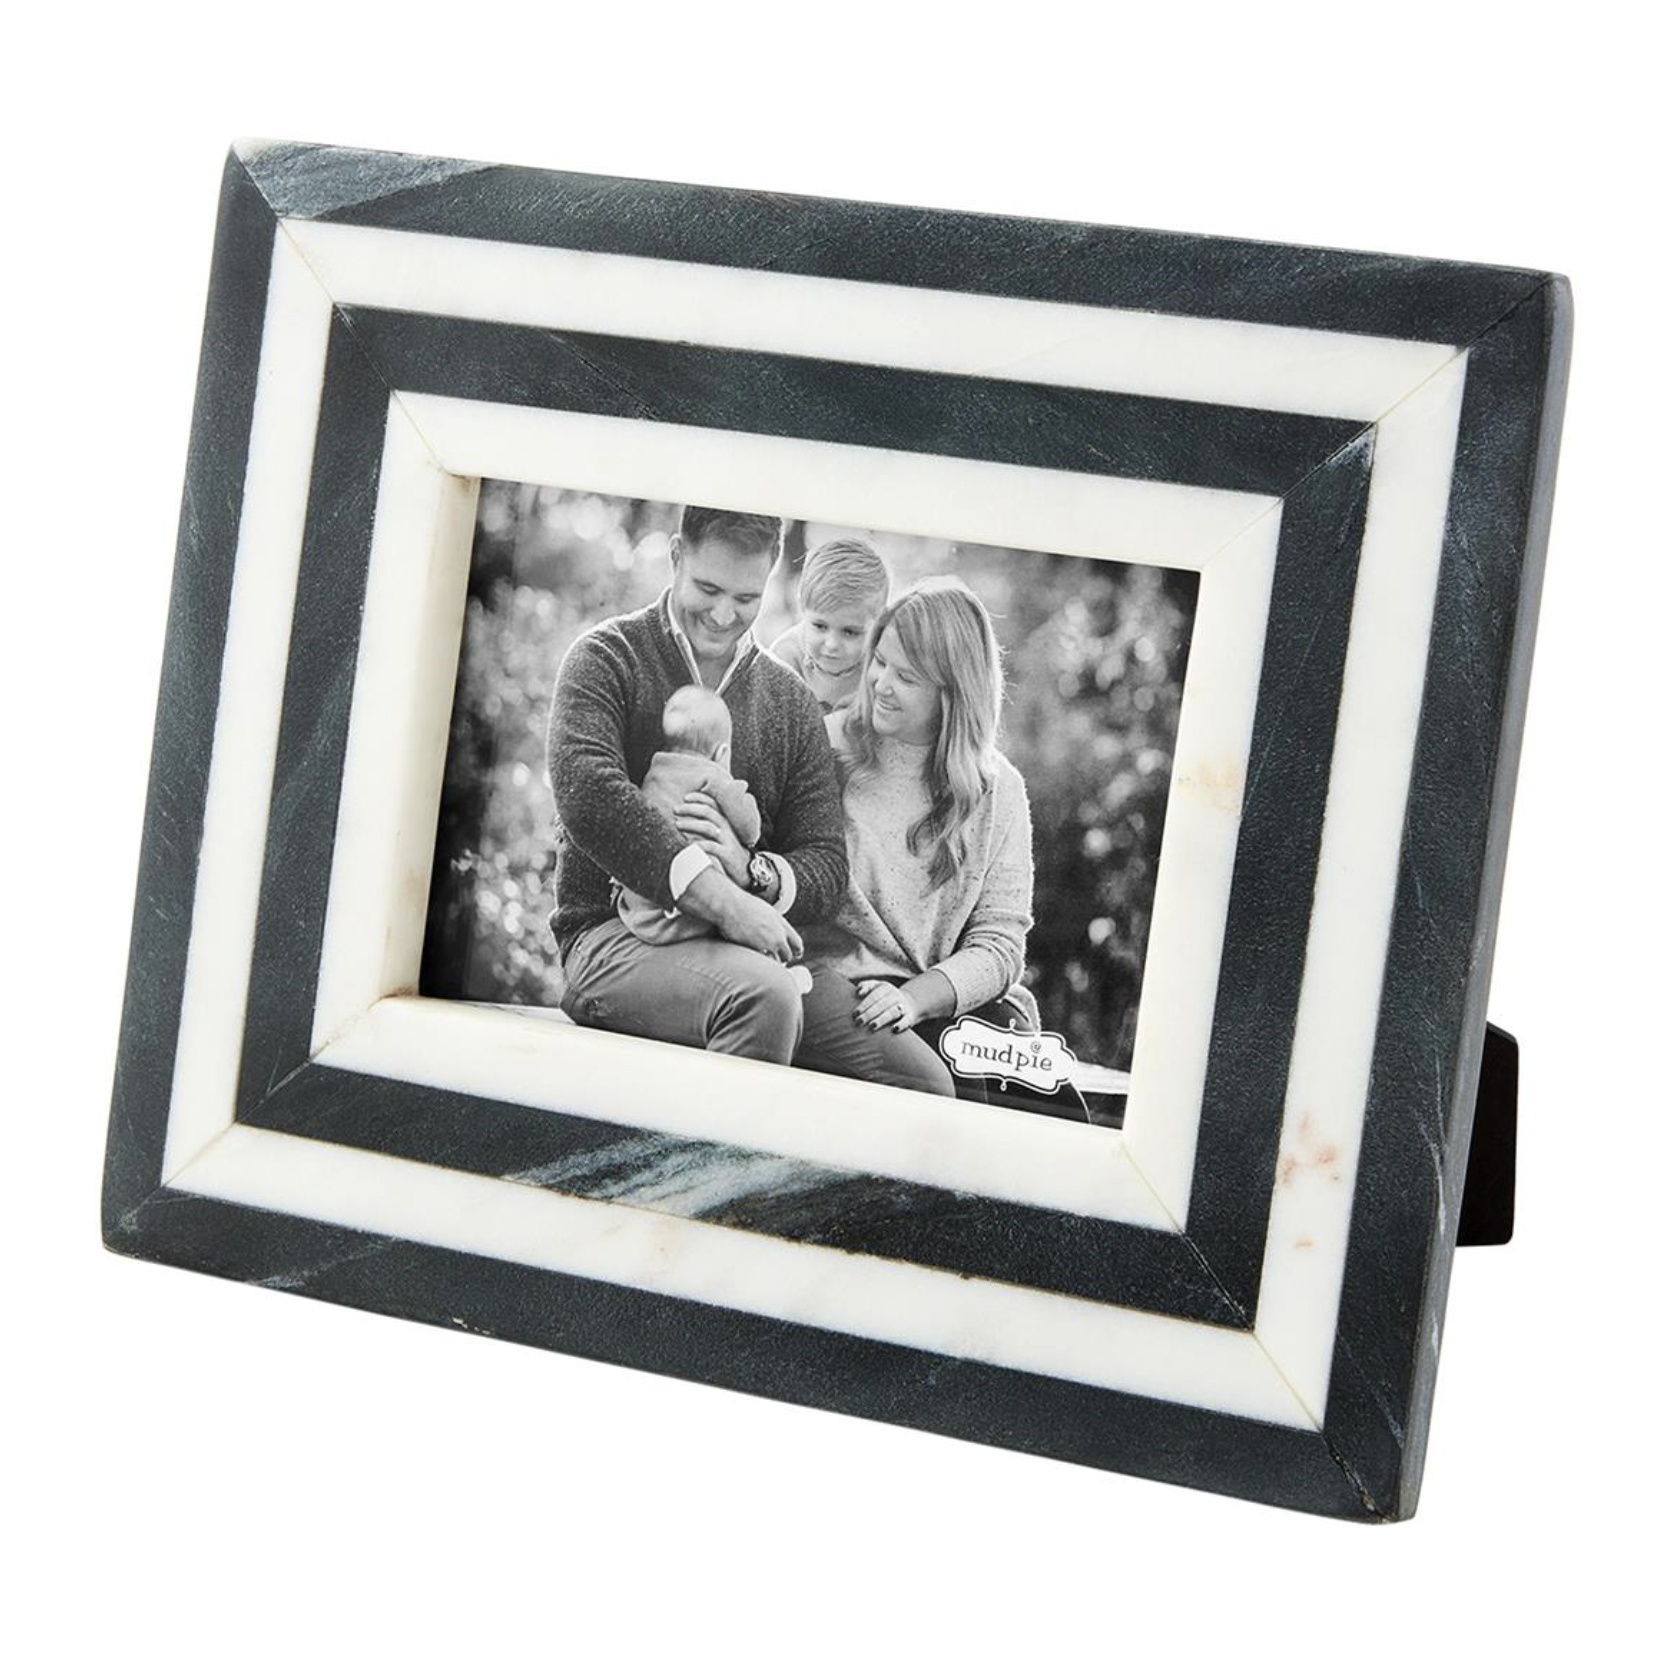 MUD PIE SMALL DUO MARBLE FRAME